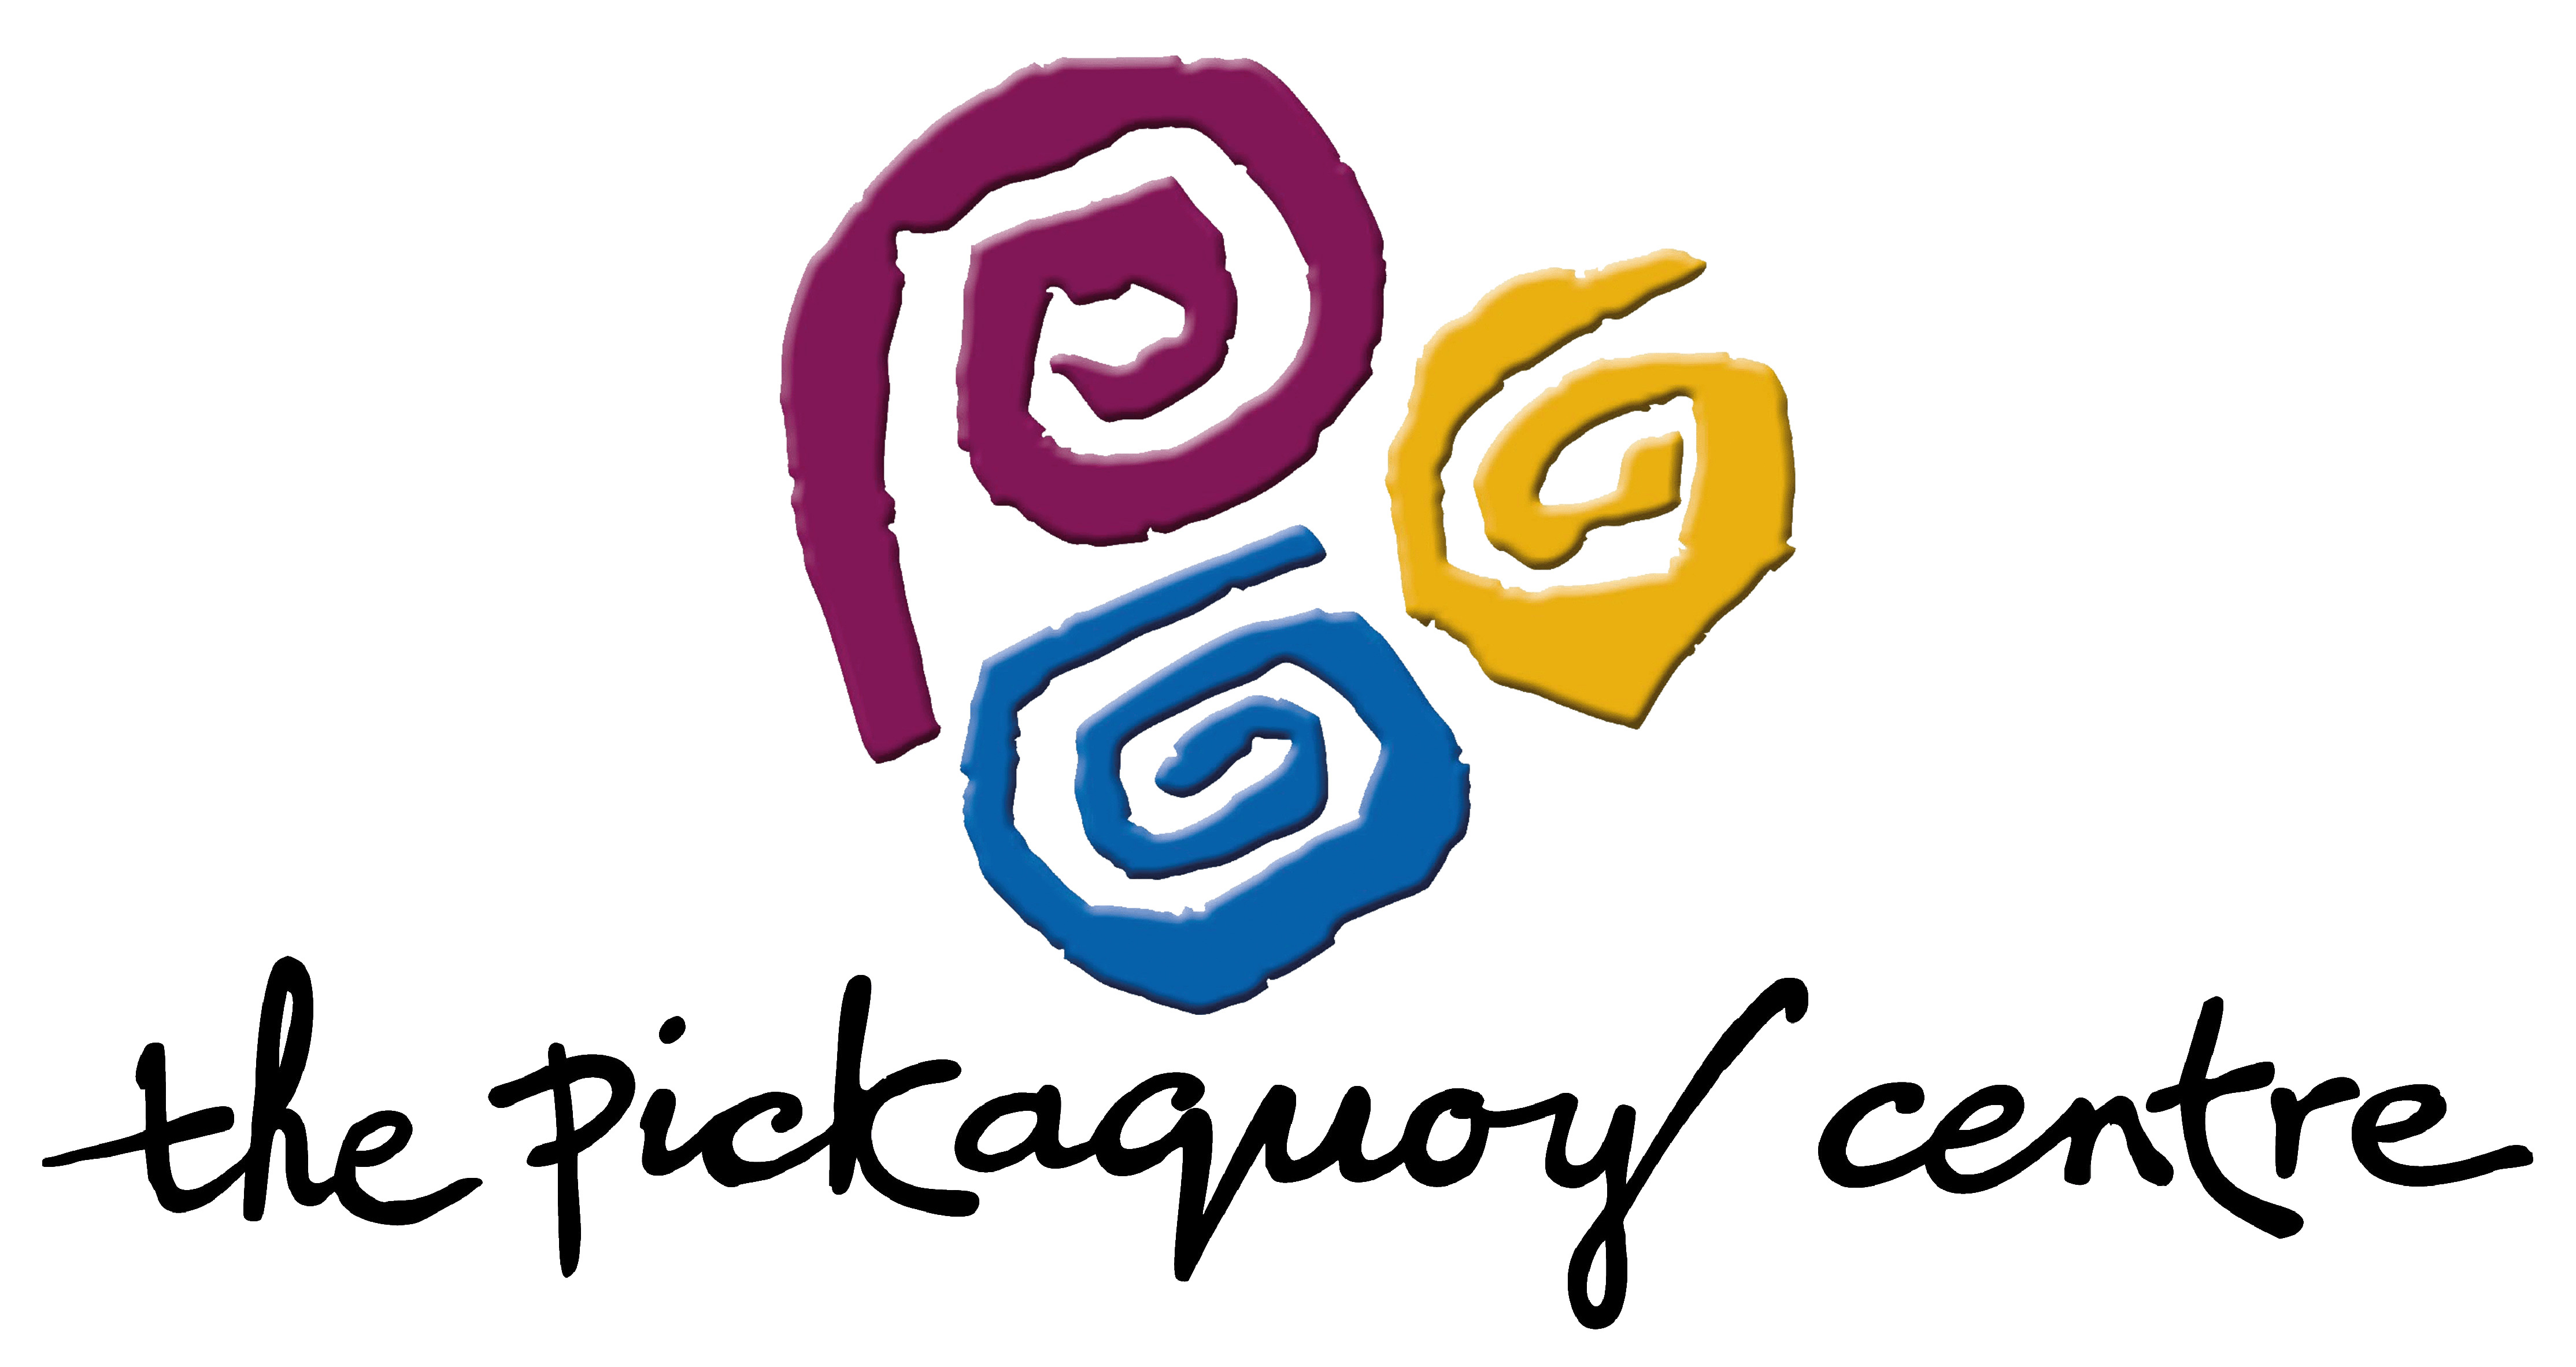 The Pickaquoy Centre is recruiting with Health Club Management